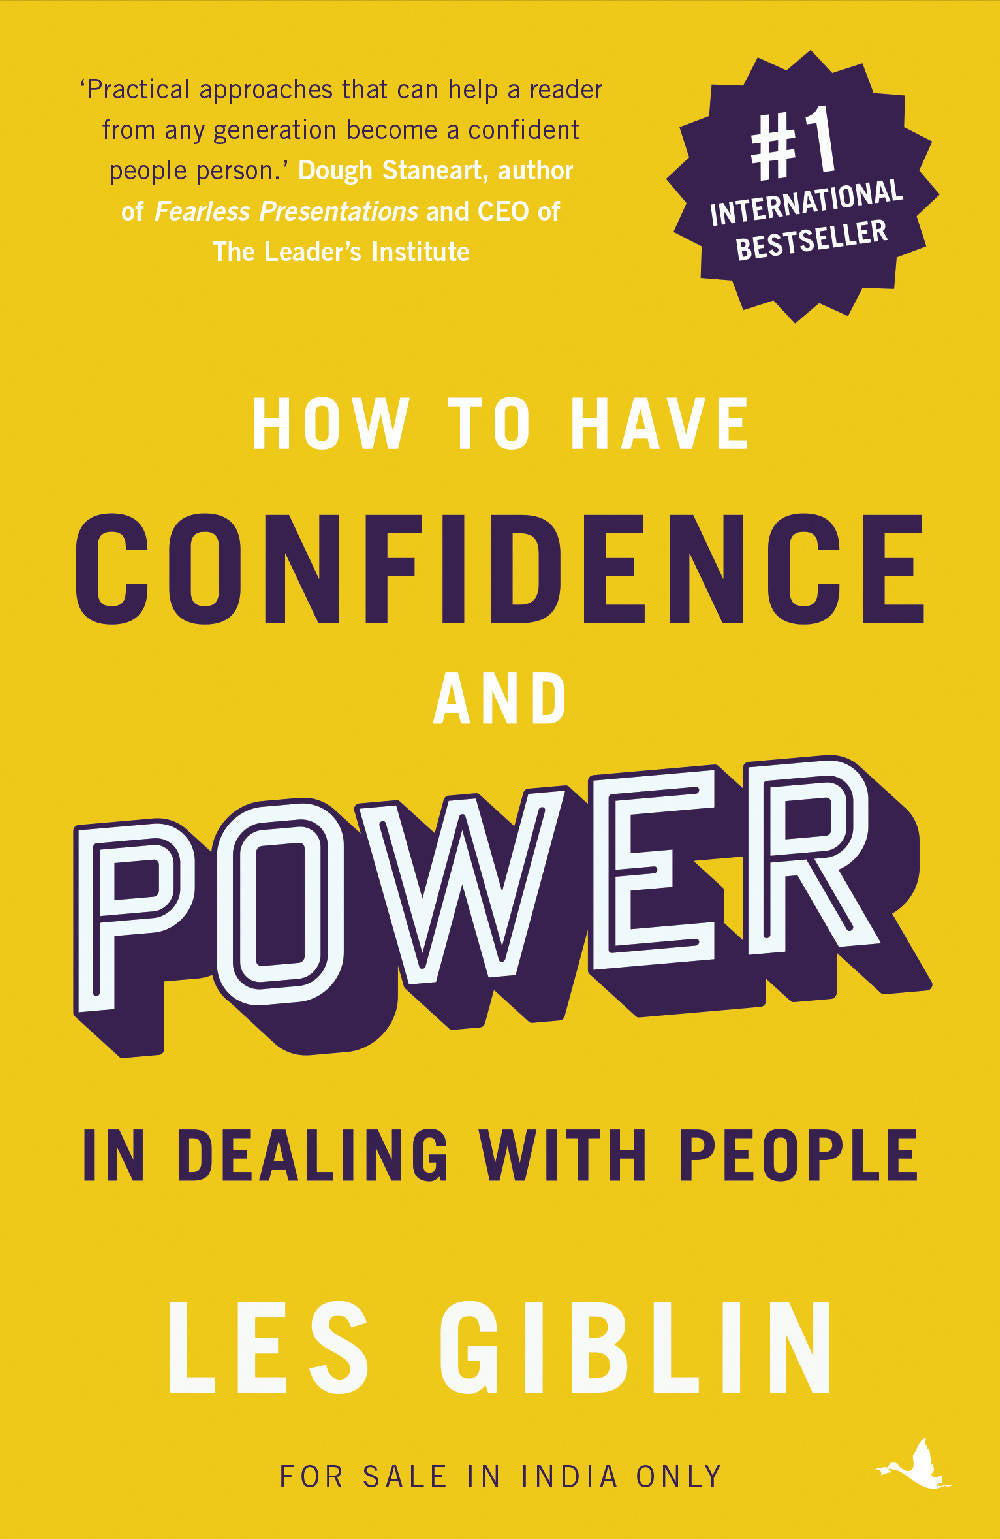 How to have Confidence and Power in dealing with people